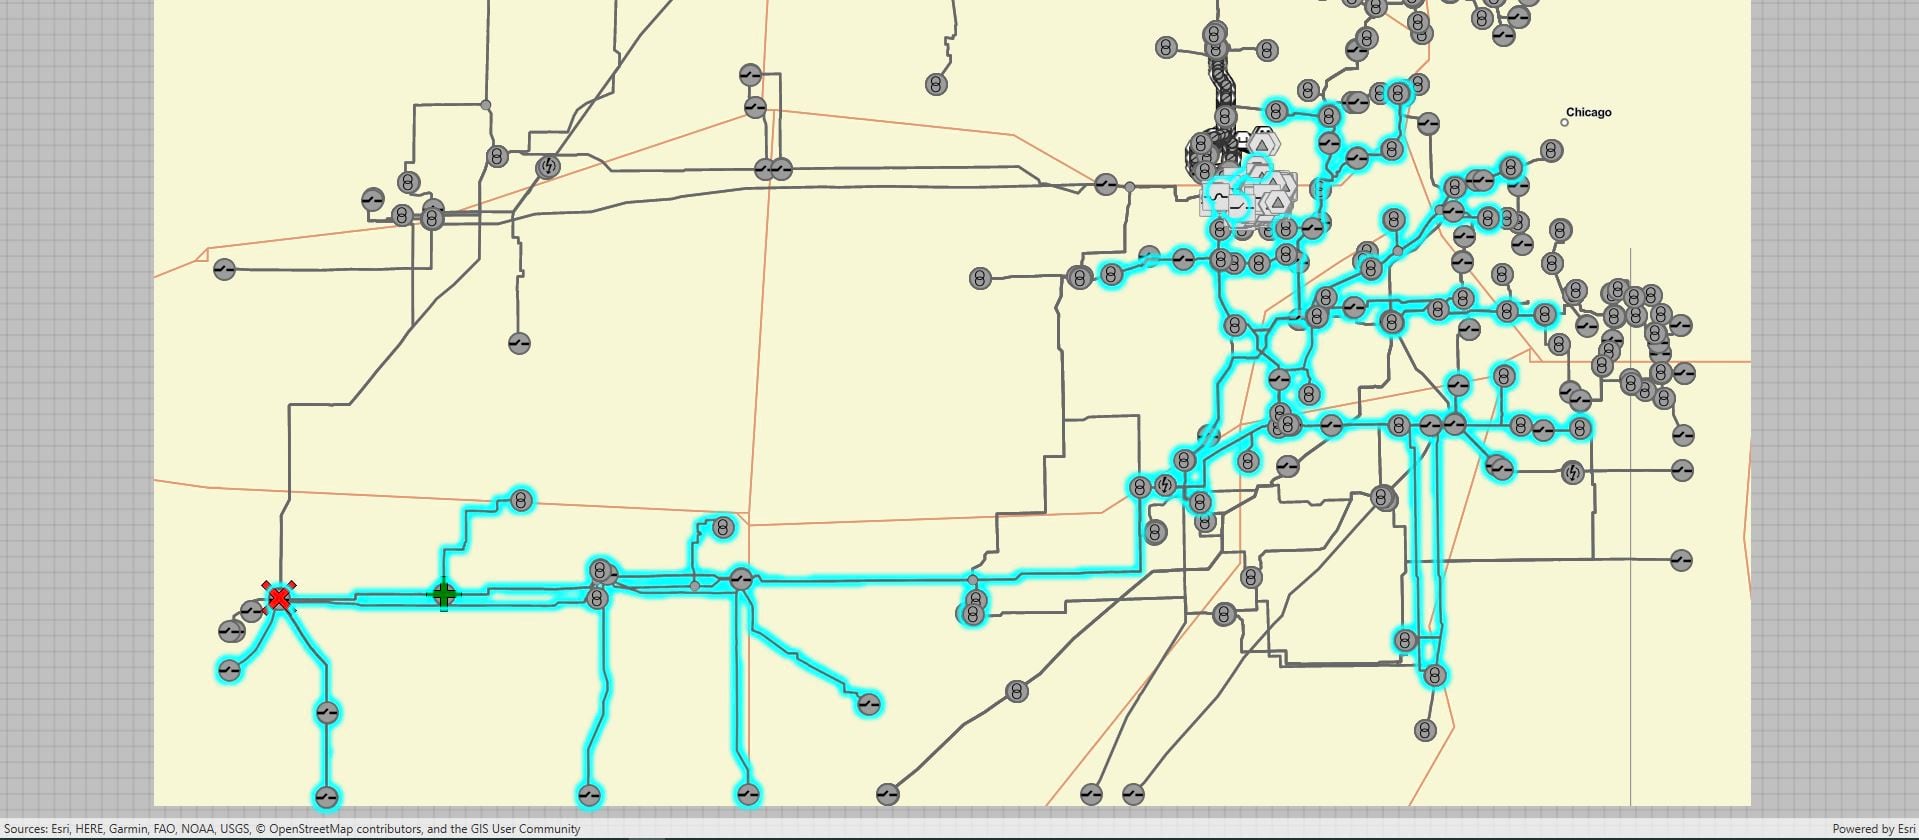 Highlighted result of a subnetwork trace on a stand-alone mobile geodatabase with Naperville Electric data.